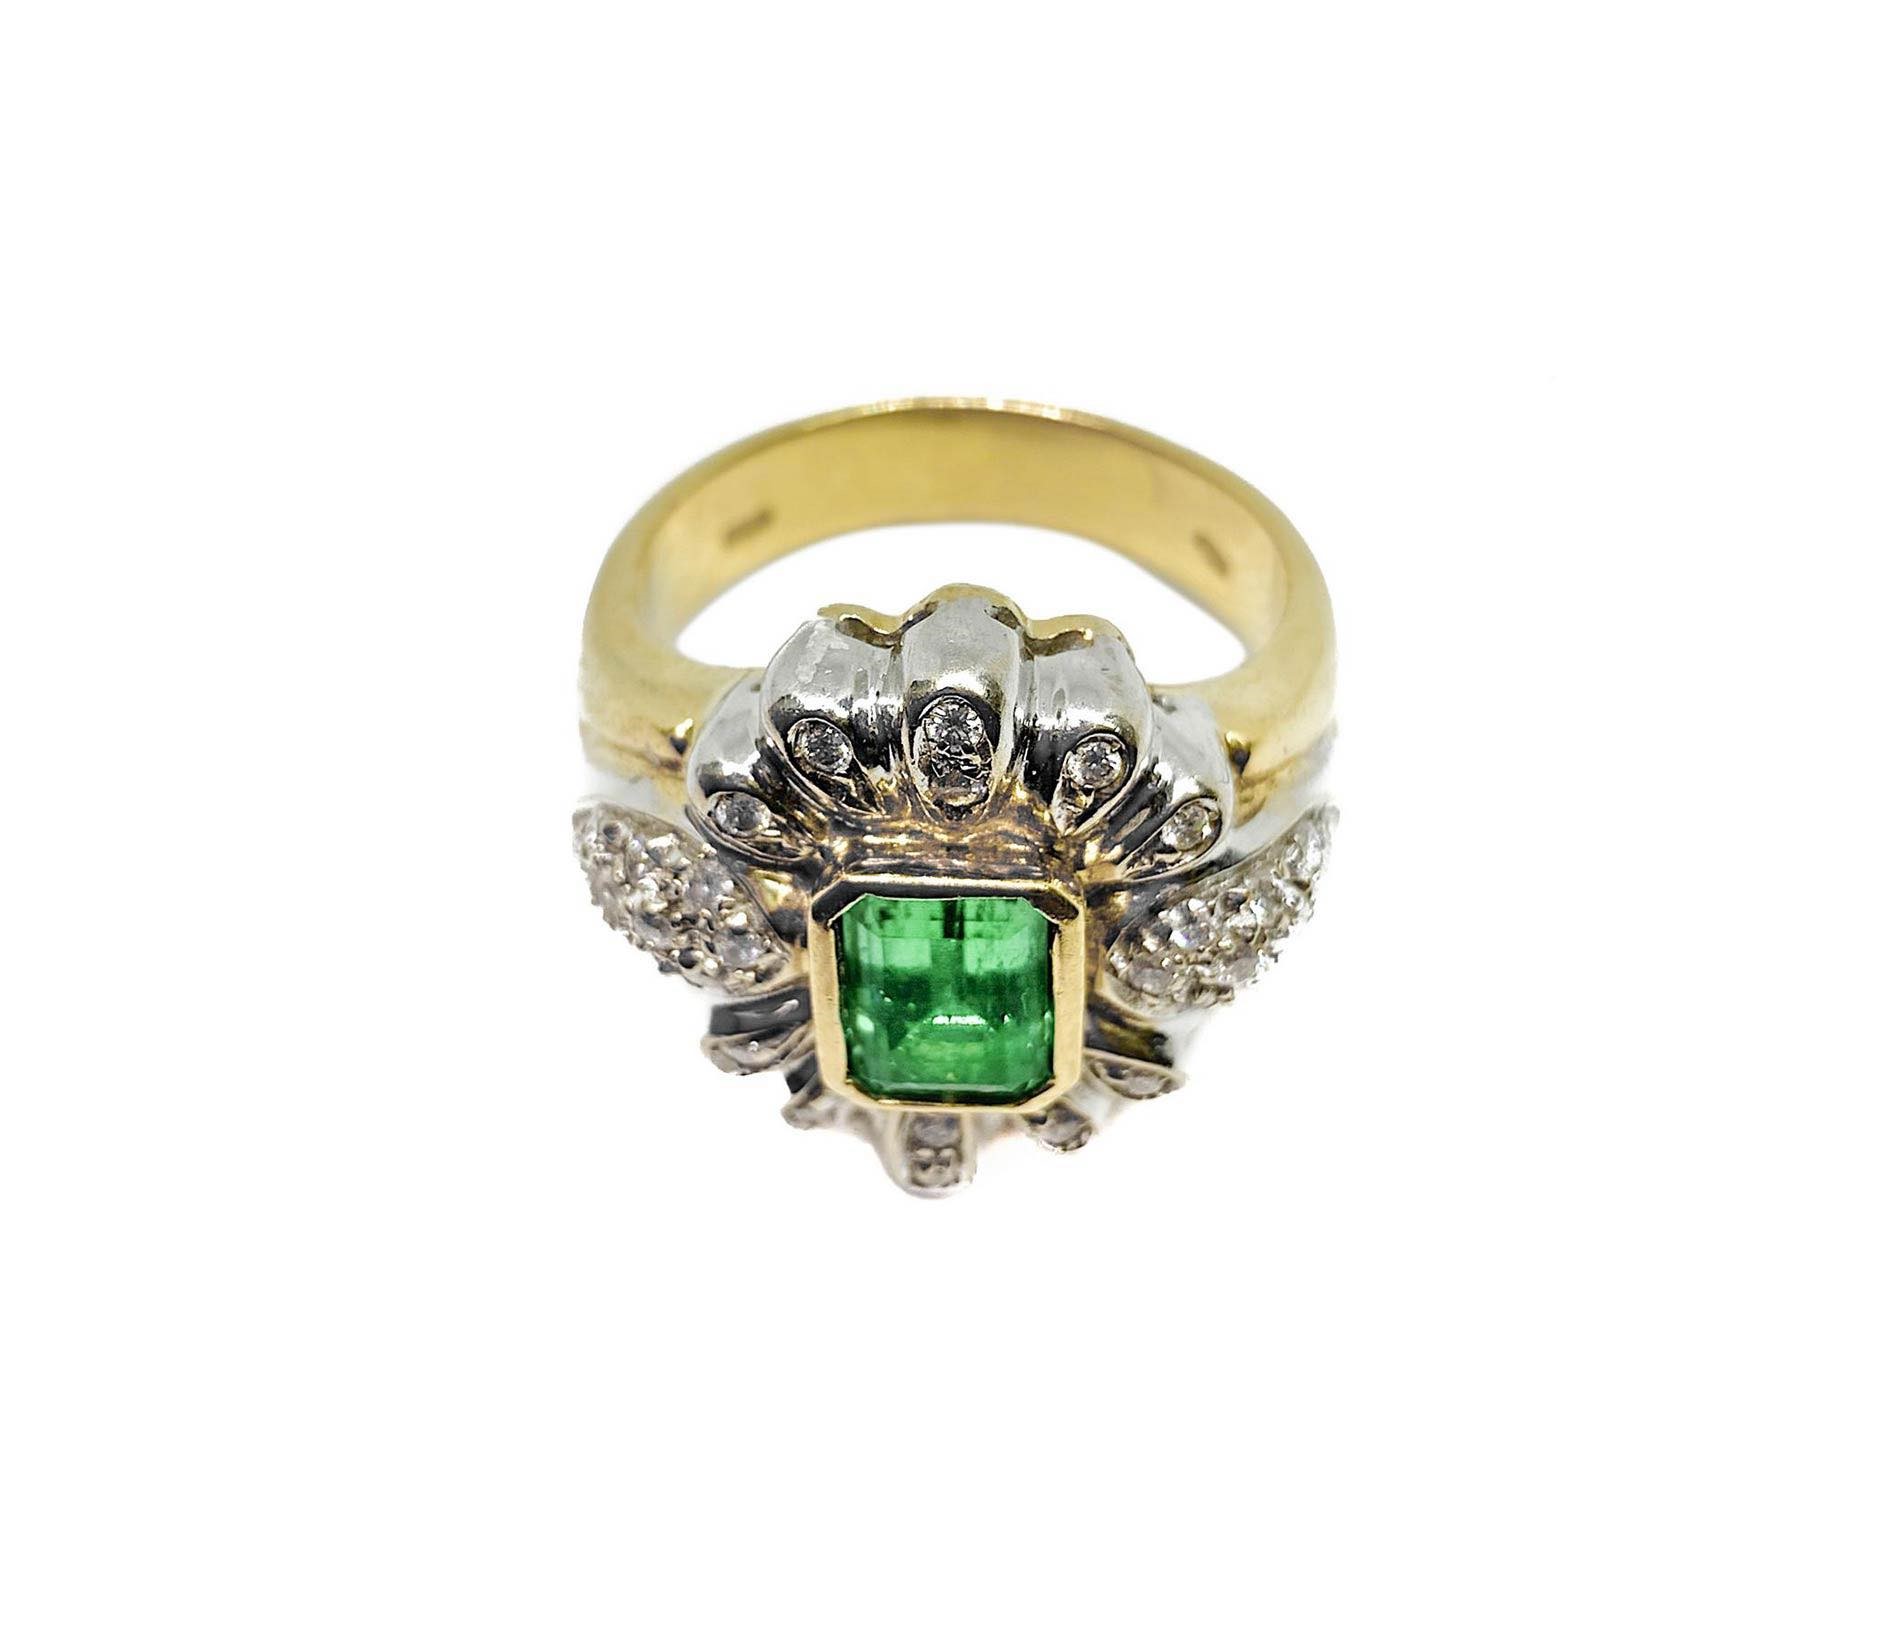 Ring in yellow gold, diamonds and emeralds - Image 4 of 6